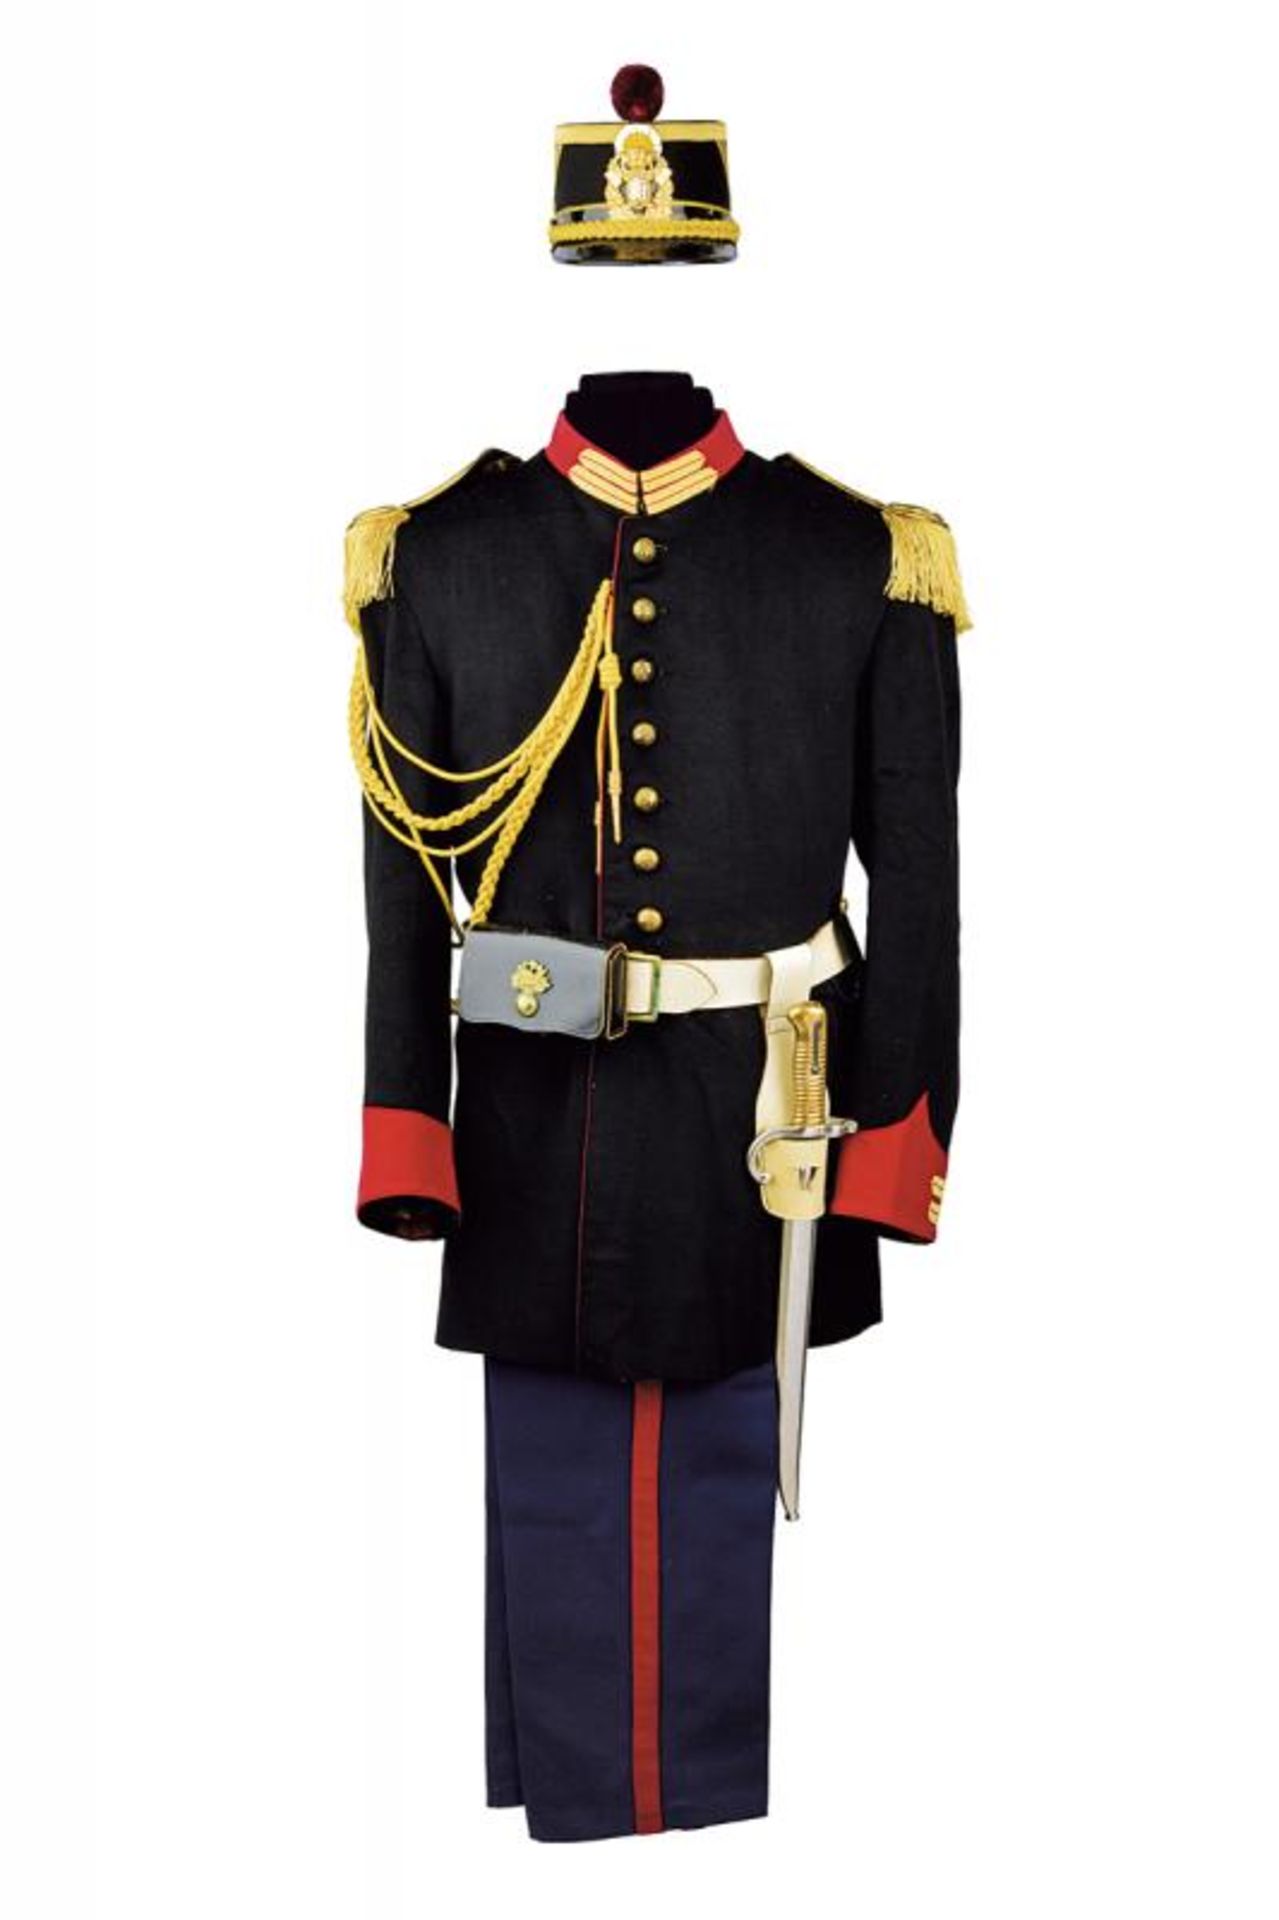 A uniform of the Palatine Guard with bayonet - Image 7 of 12